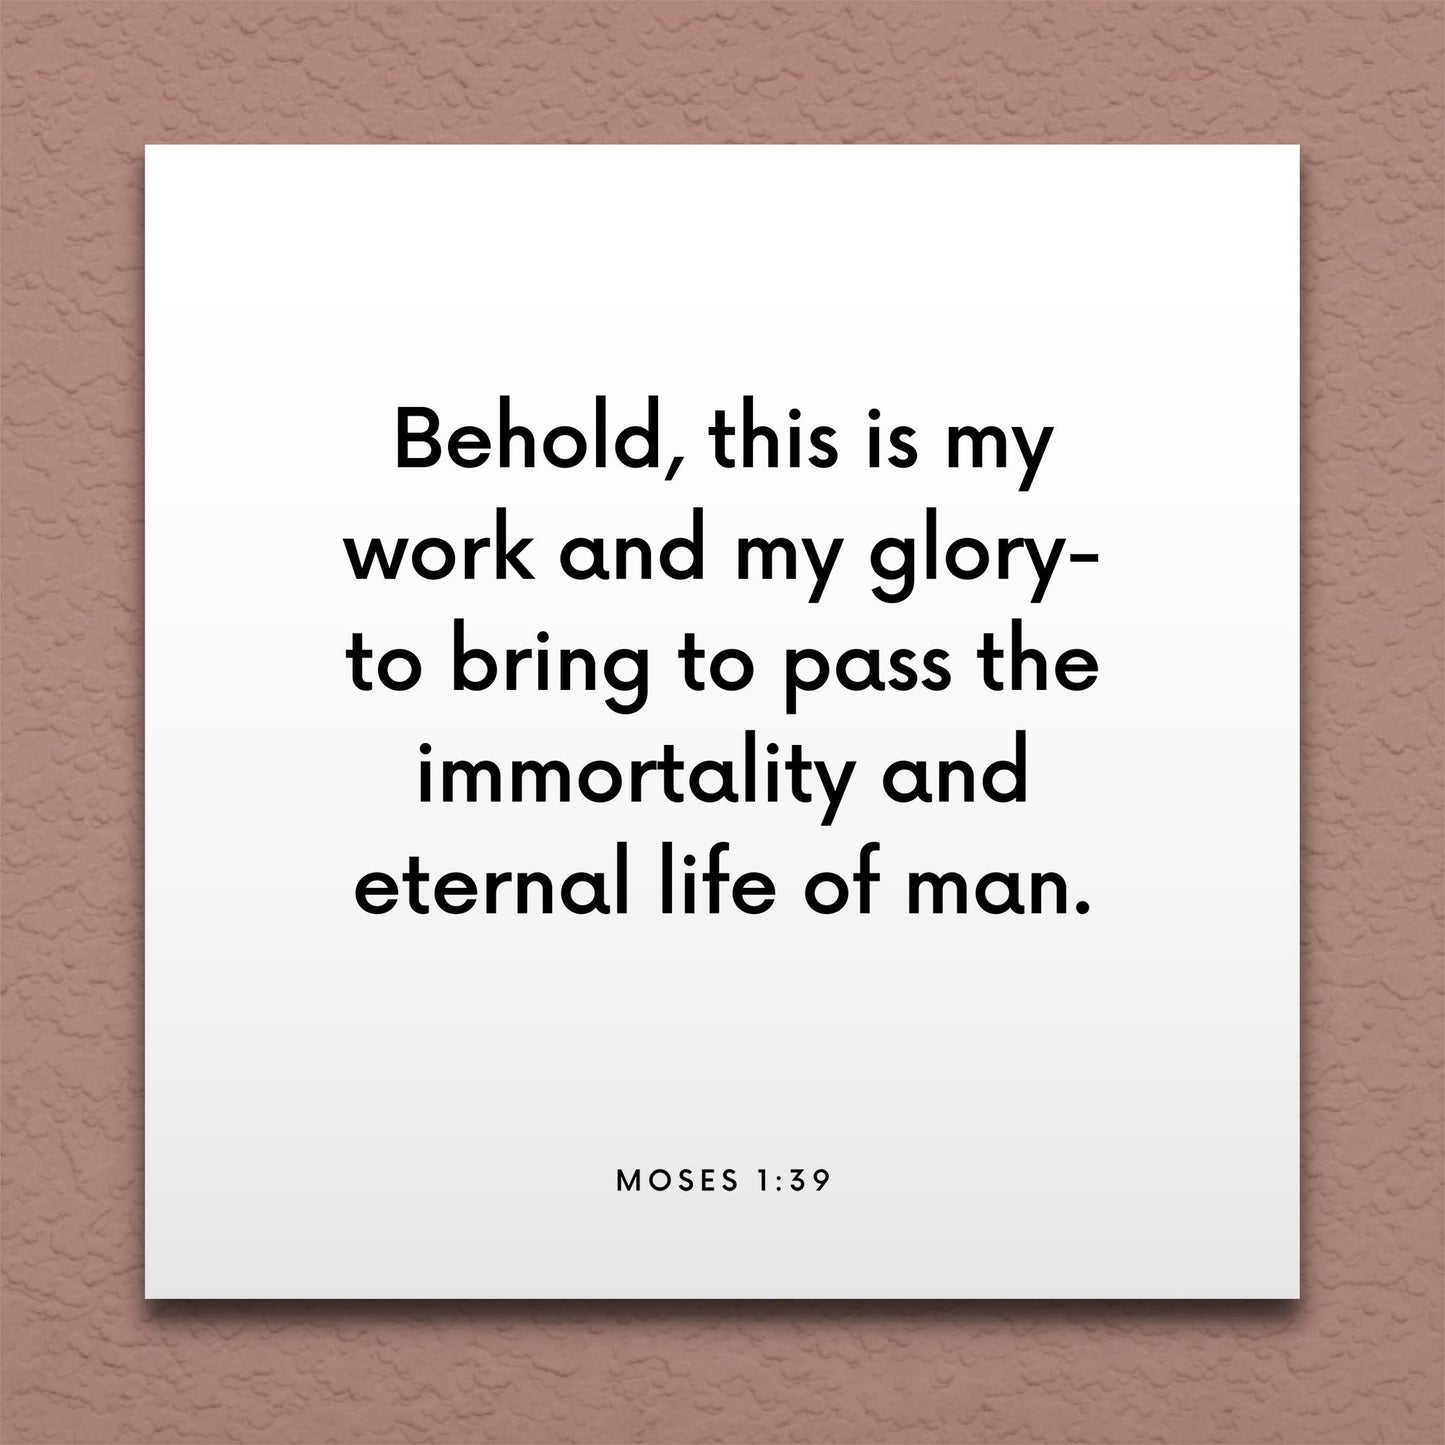 Wall-mounted scripture tile for Moses 1:39 - "Behold, this is my work and my glory"